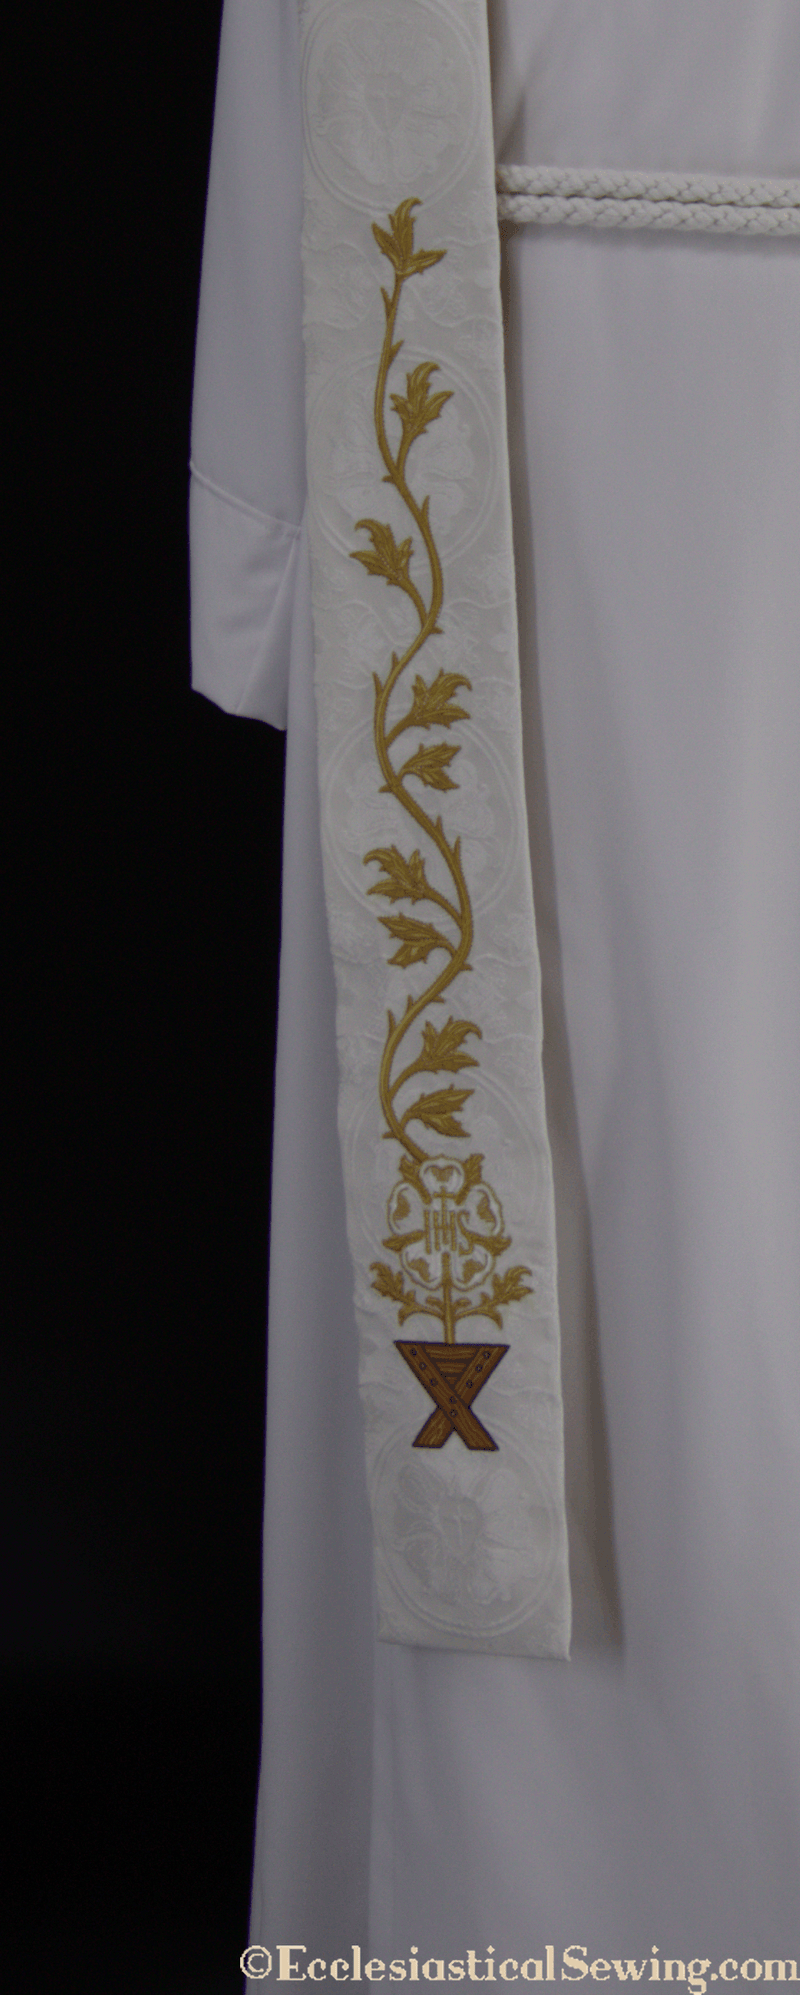 files/white-clergy-stoles-or-christmas-rose-easter-collection-style-4-ecclesiastical-sewing-3-31790324809984.png